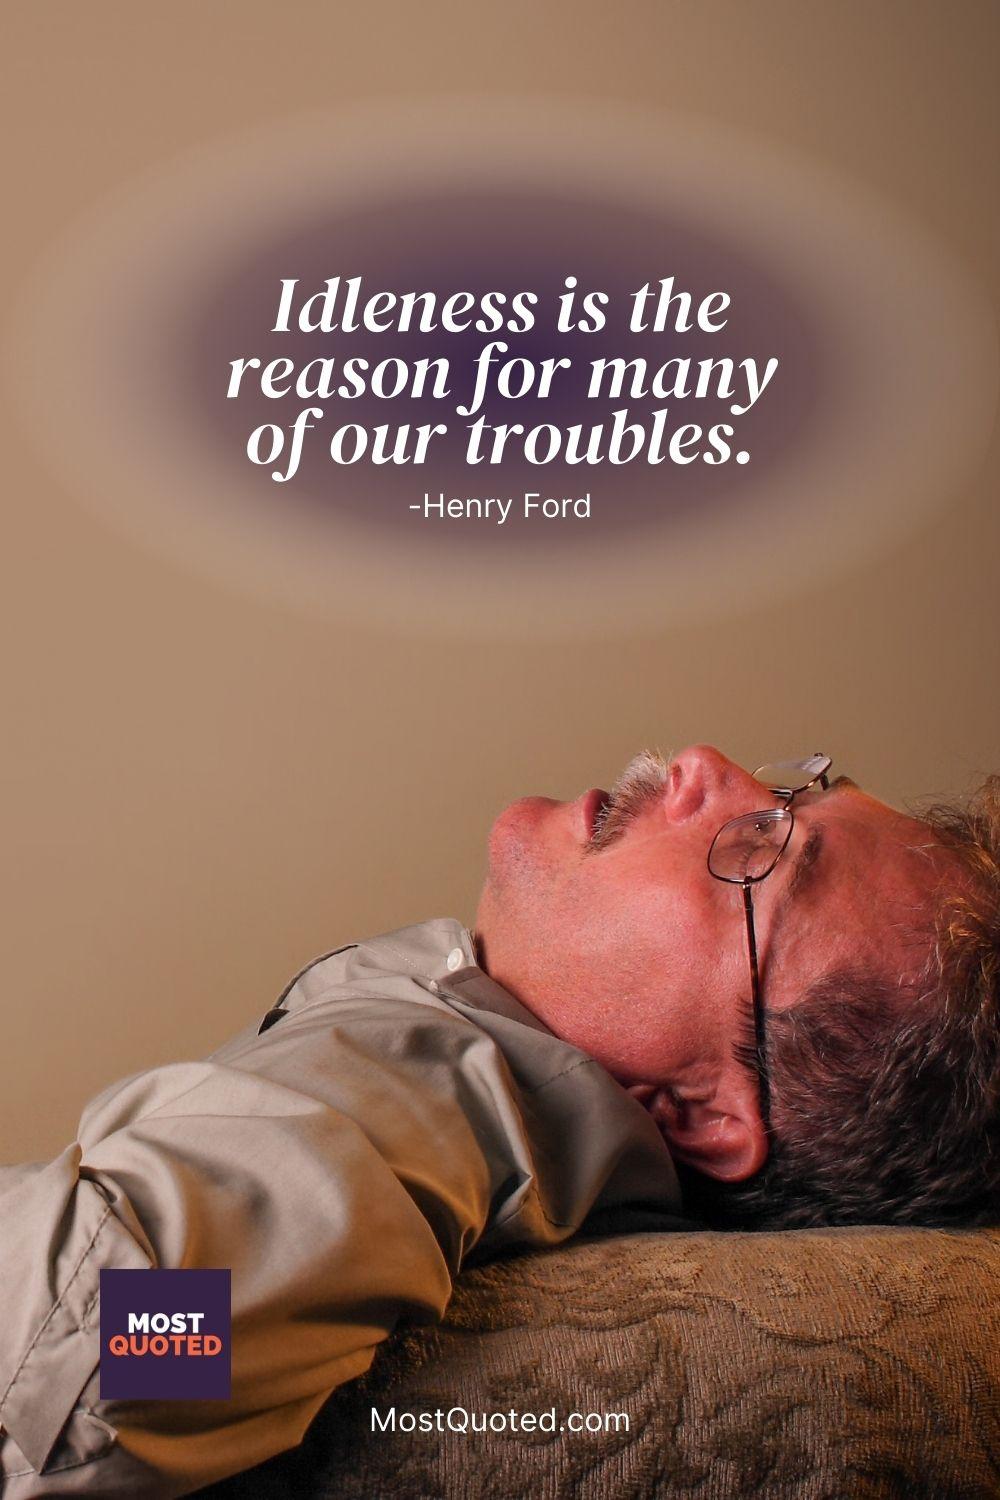 Idleness is the reason for many of our troubles. - Henry Ford